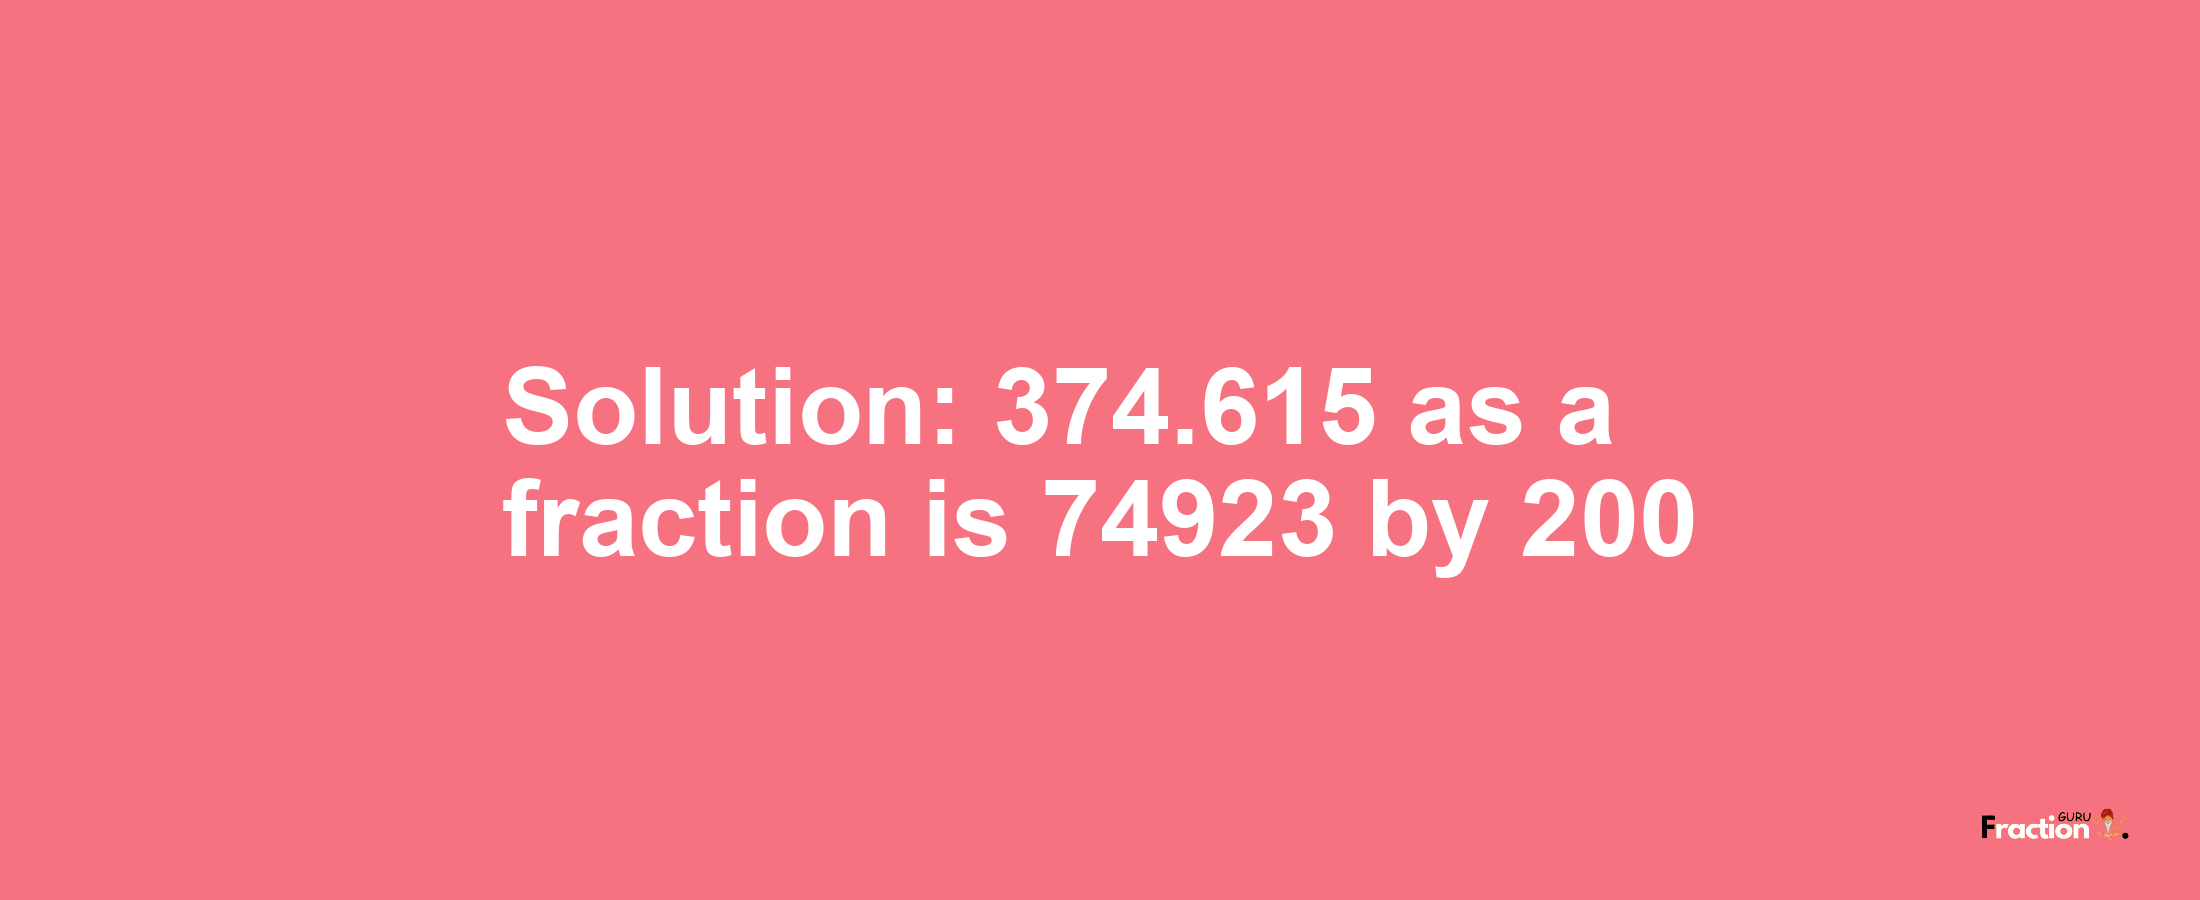 Solution:374.615 as a fraction is 74923/200